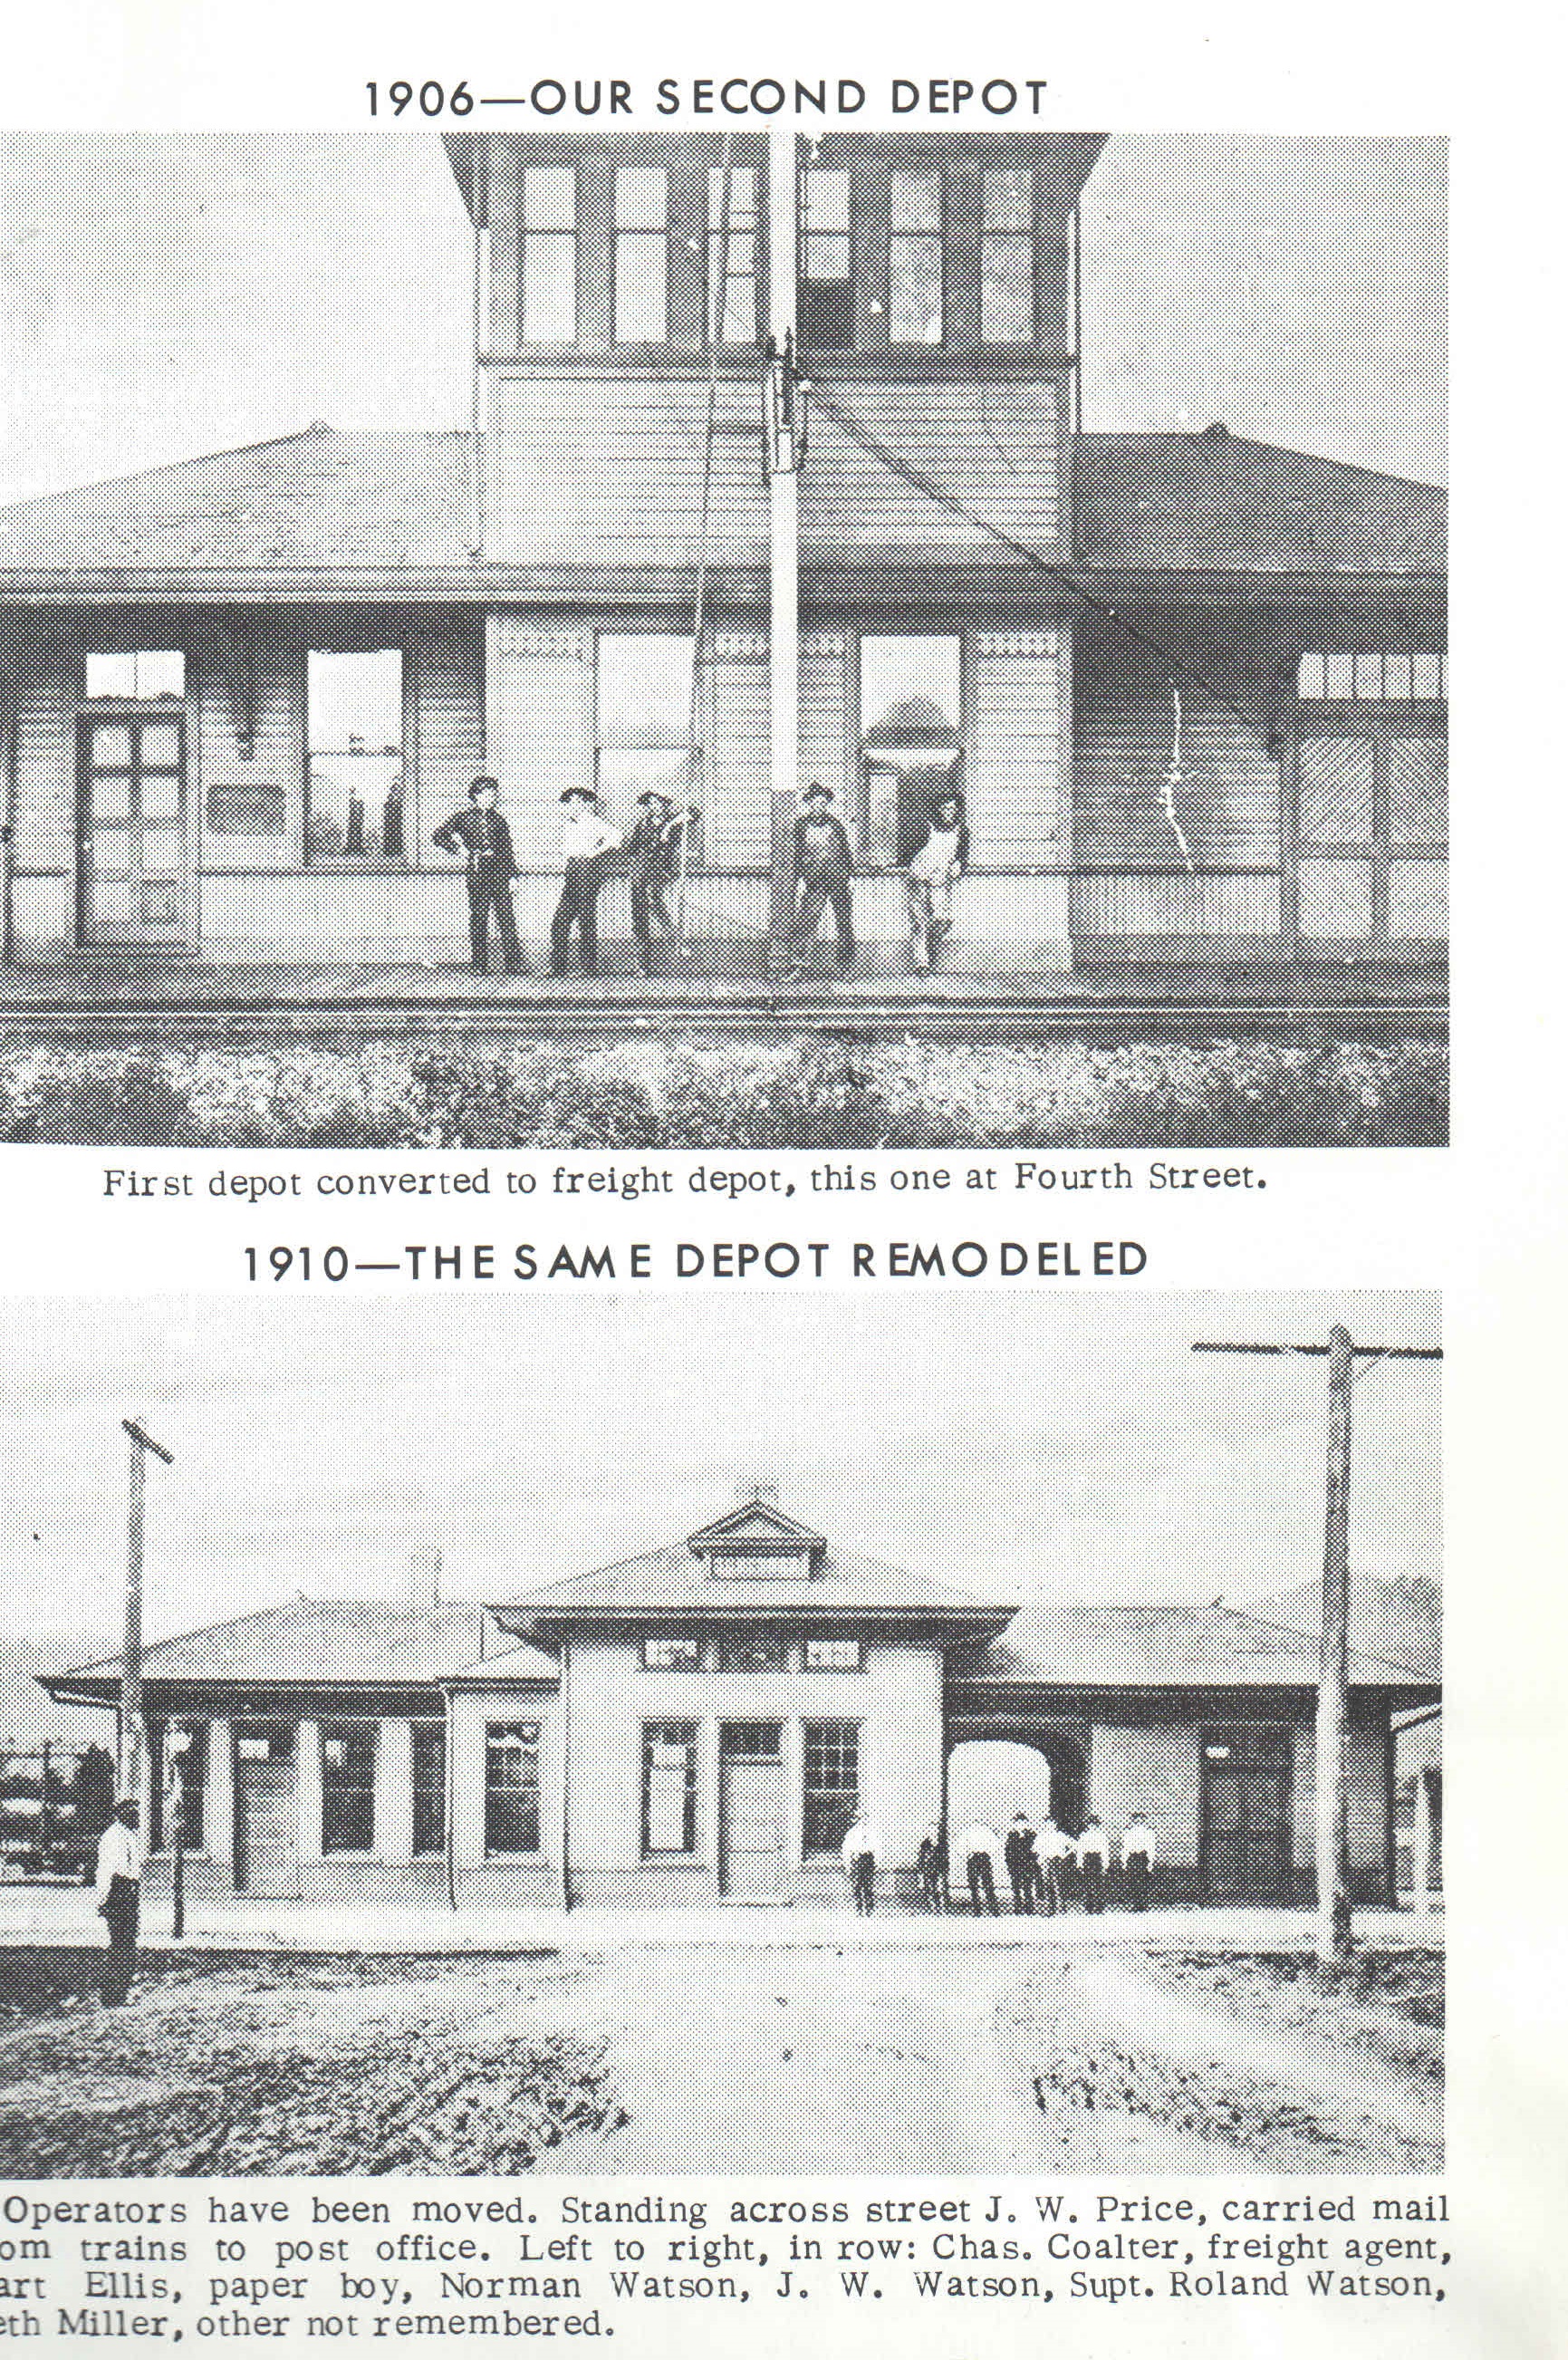 1906 C&O Rail Road Depot Photo courtesy of:  Neil Richardson, President of the St. Albans Historical Society; photo taken from the Dart Ellis' book:  "Coalsmouth which is now St. Albans, WV" in 1977.
